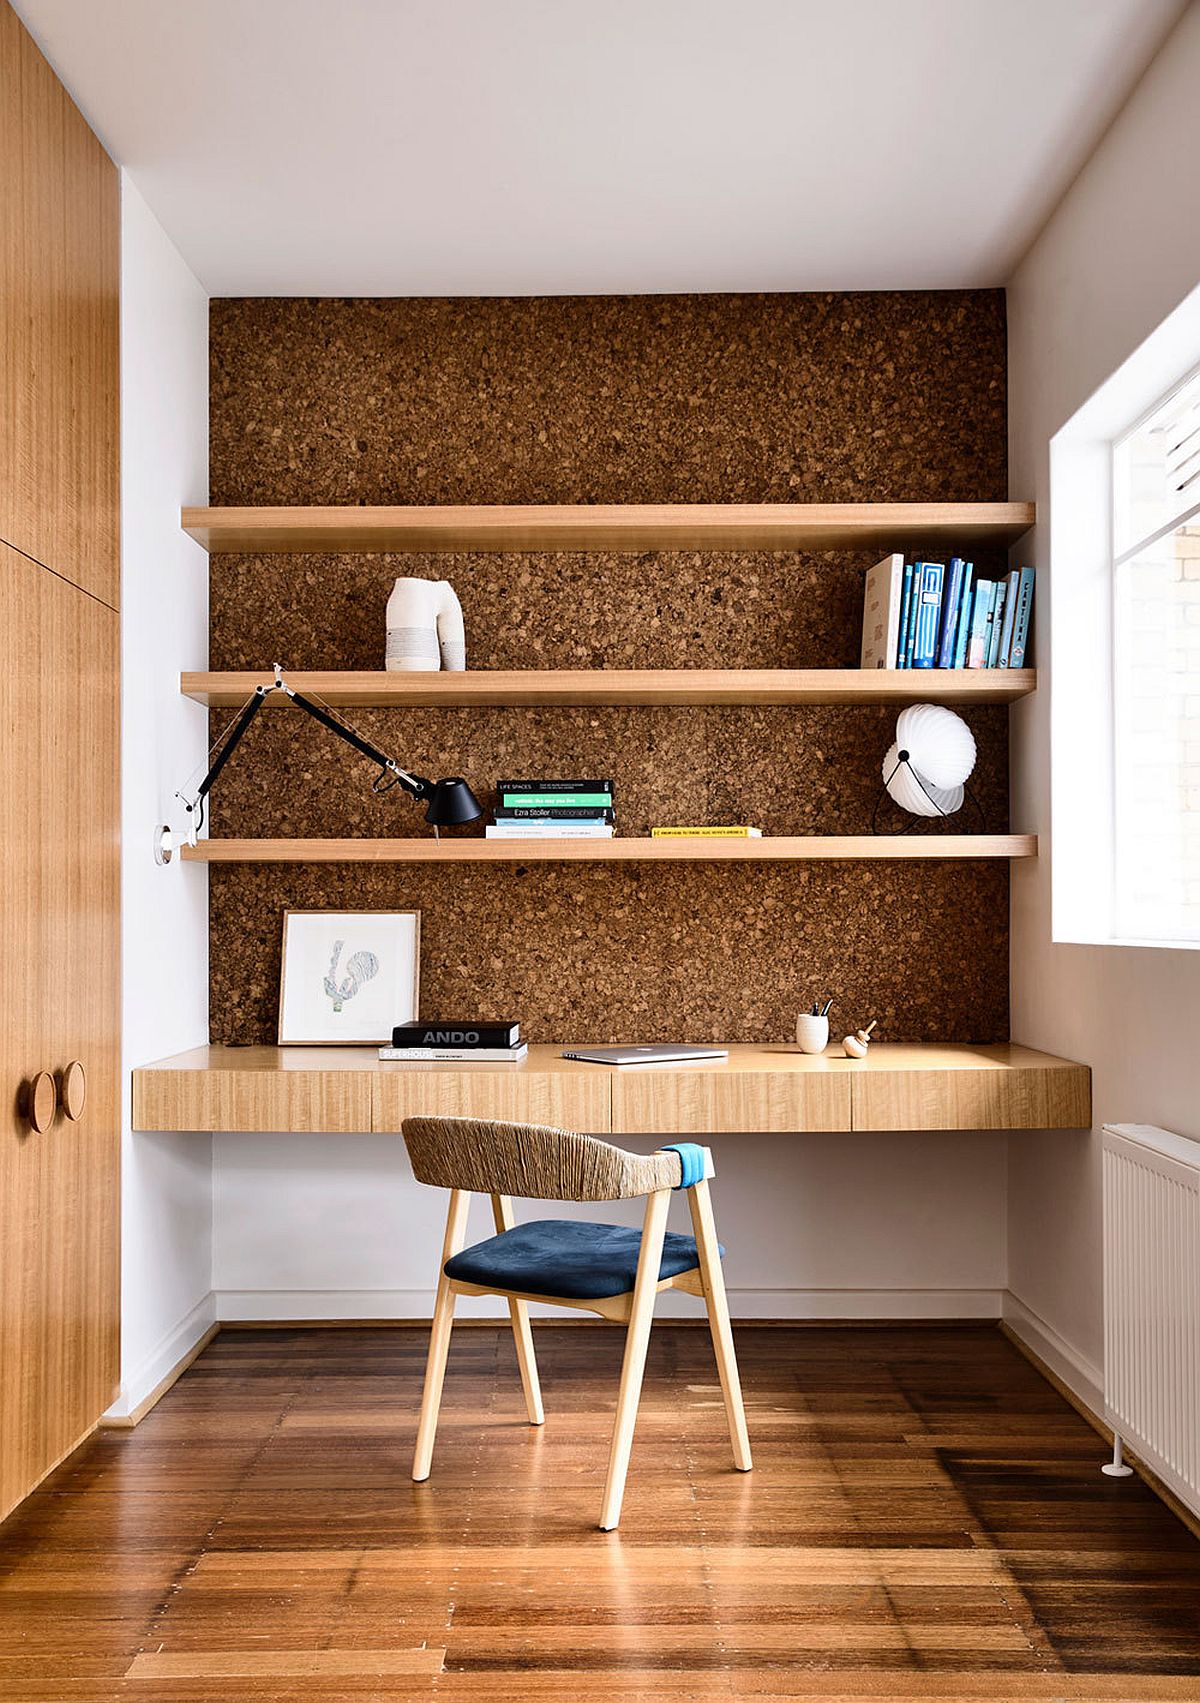 Space-savvy home workspace at the end of the hallway with floating shelves